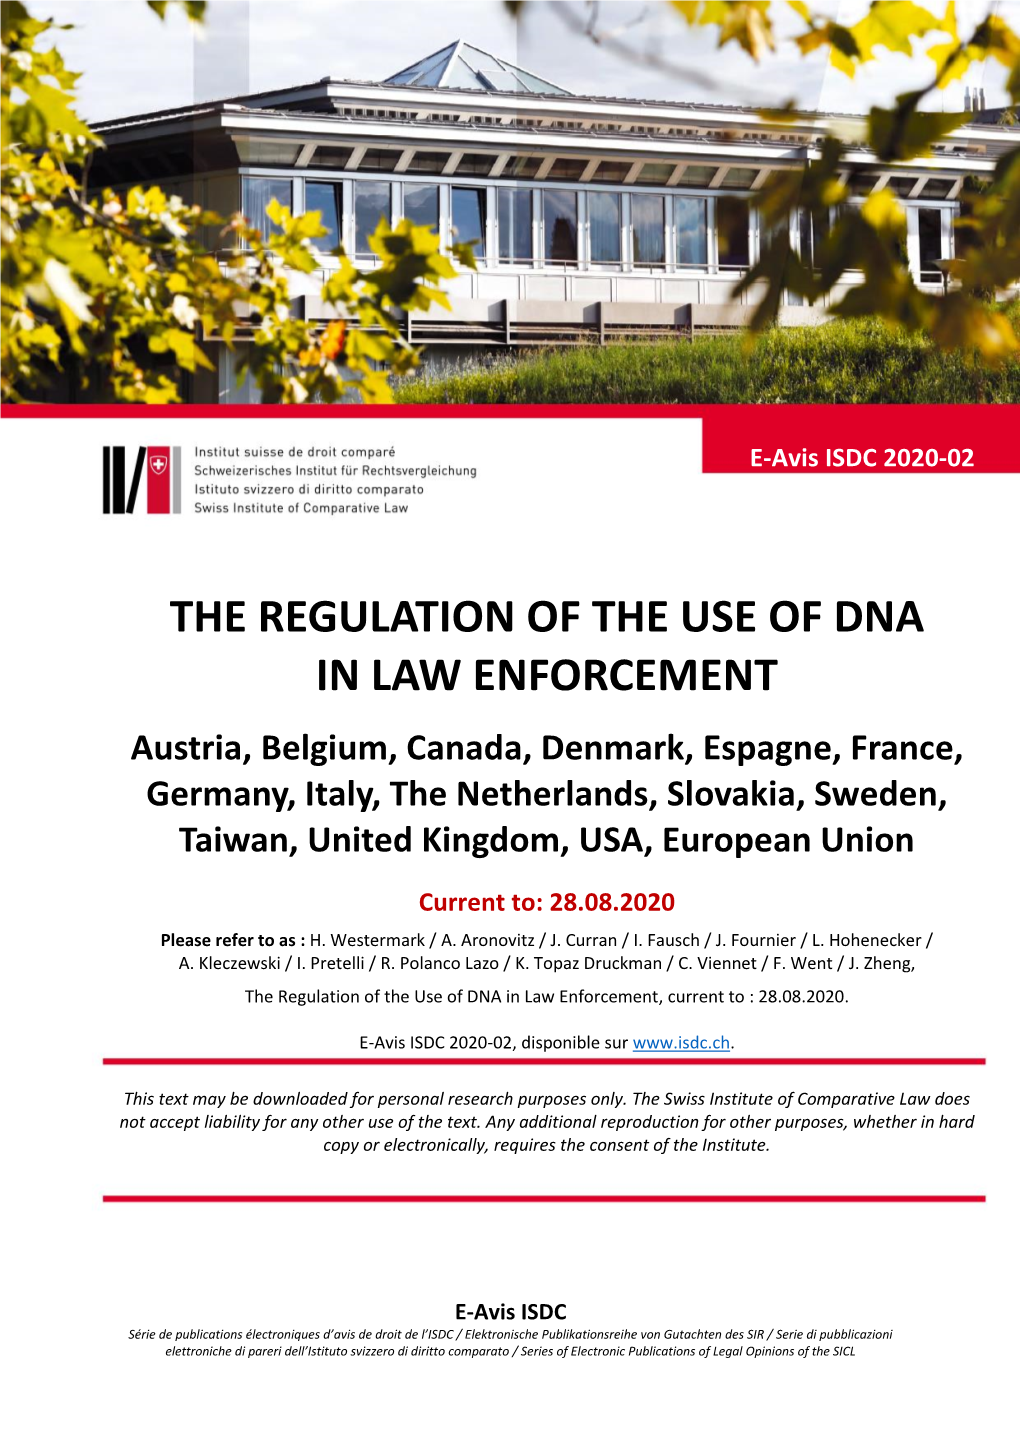 The Regulation of the Use of Dna in Law Enforcement